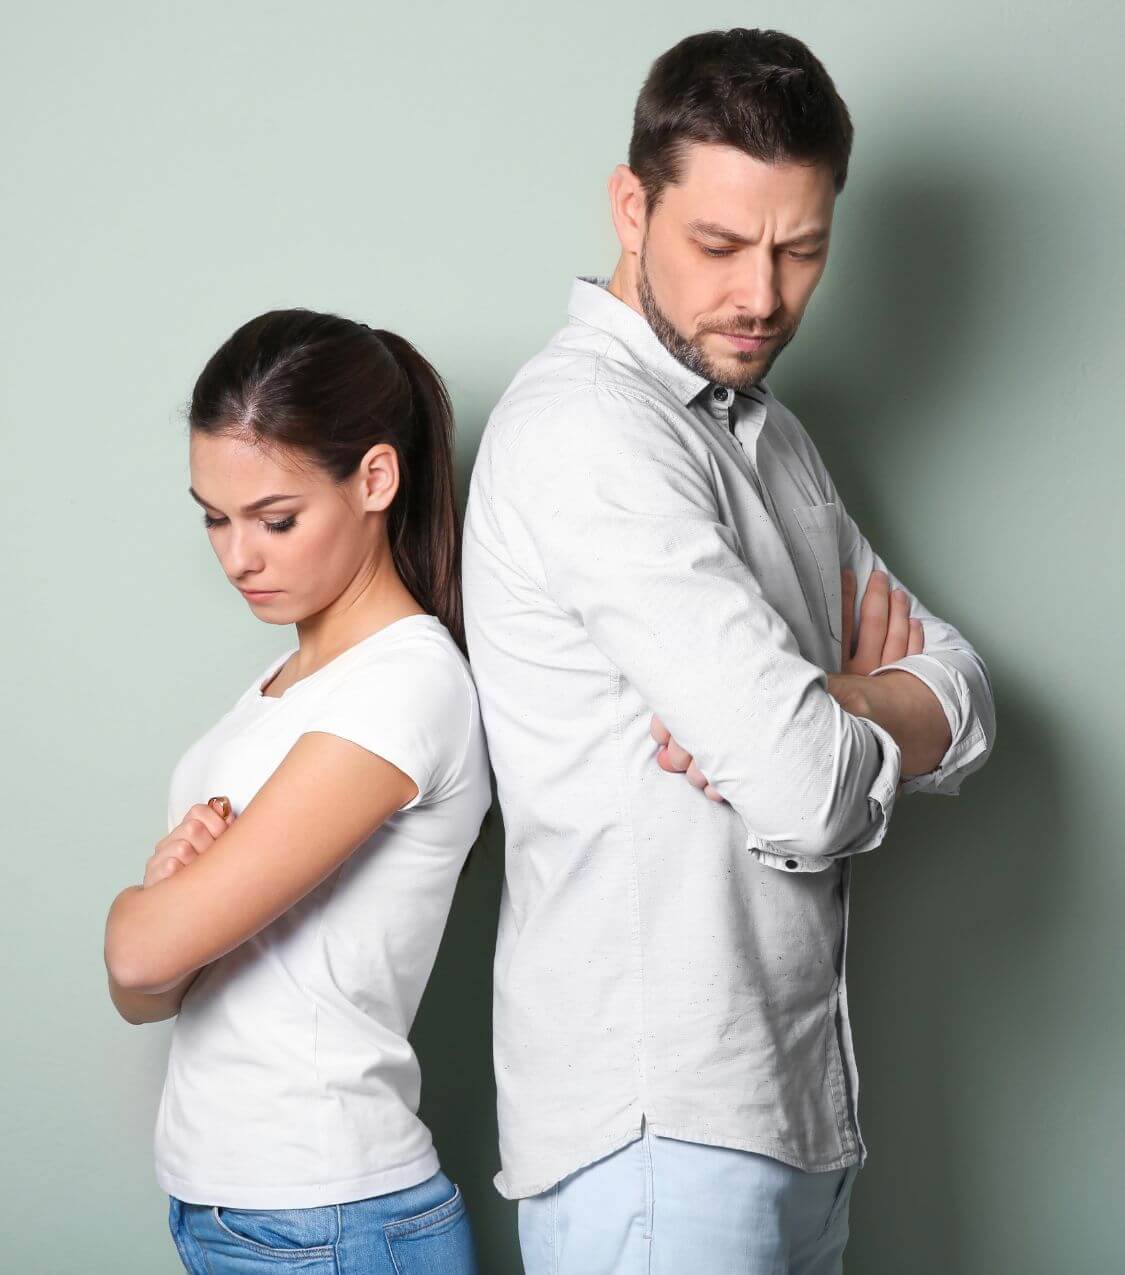 Image of an upset couple with their backs to each other and arms crossed. With the help of couples therapy in Miami, FL you and your partner can work on the conflict affecting your intimacy.